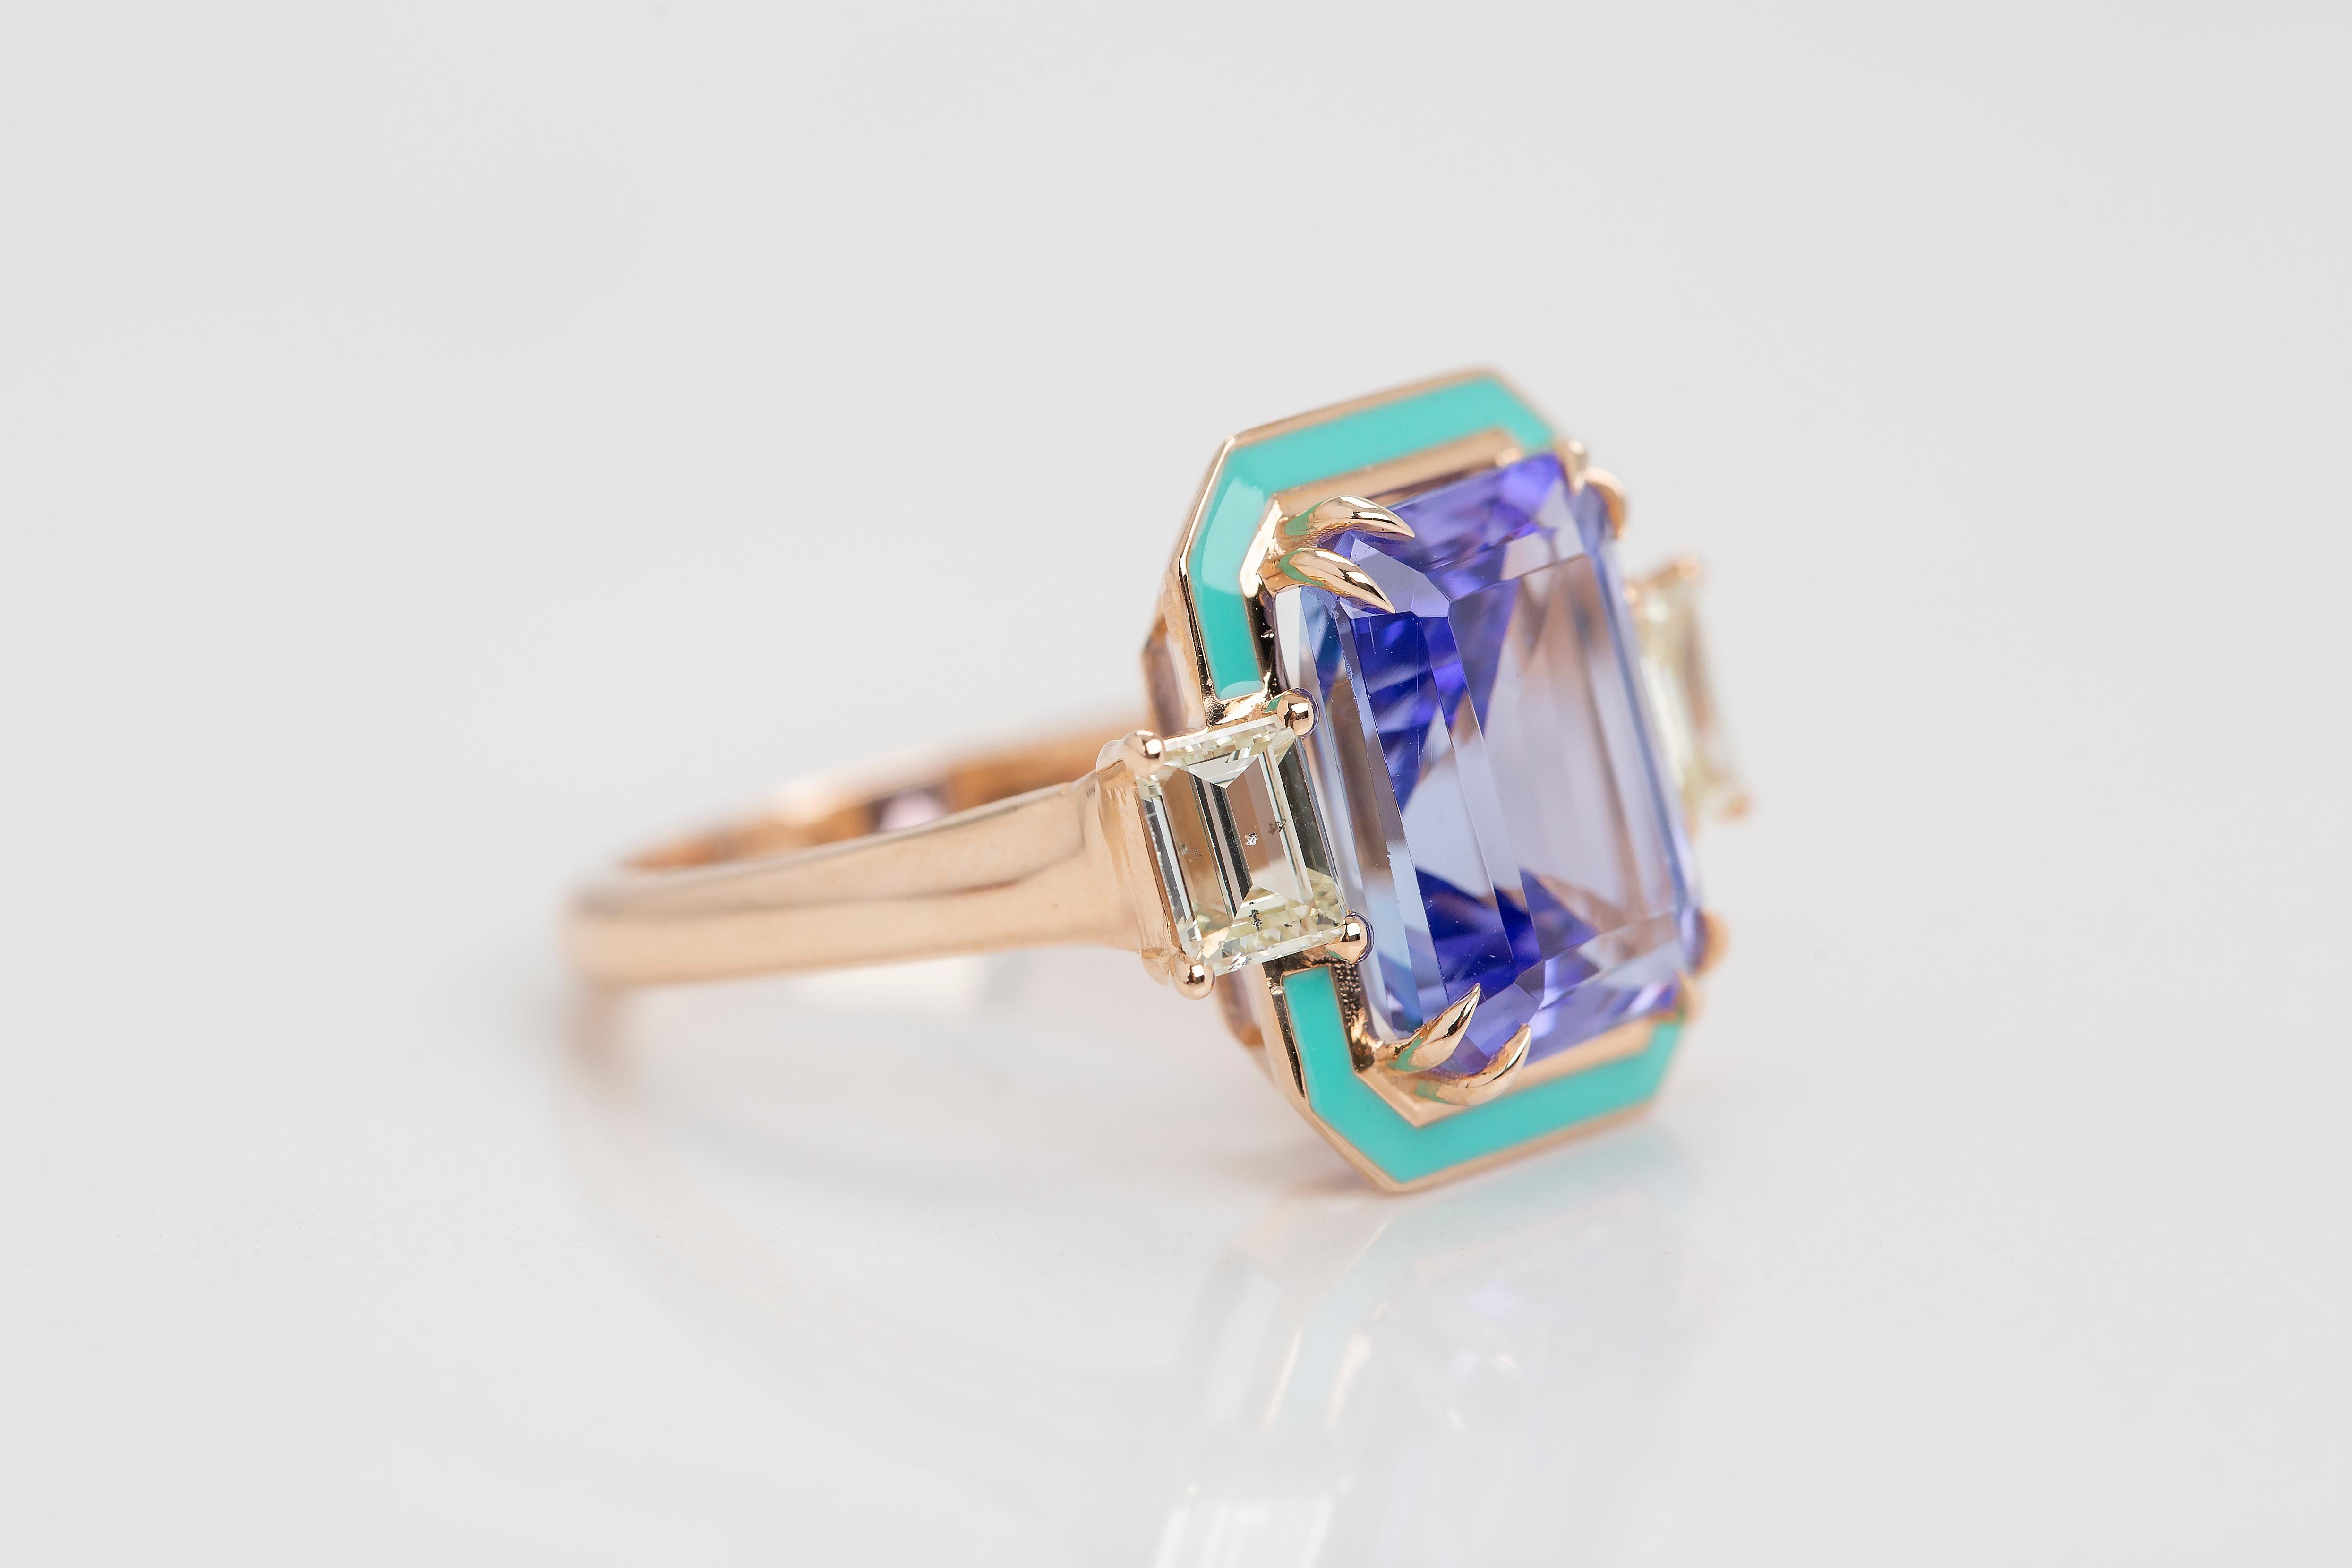 Art Deco Style Enameled 14K Gold Cocktail Ring with Tanzanite and Diamonds

This ring was made with quality materials and excellent handwork. I guarantee the quality assurance of my handwork and materials. It is vital for me that you are totally